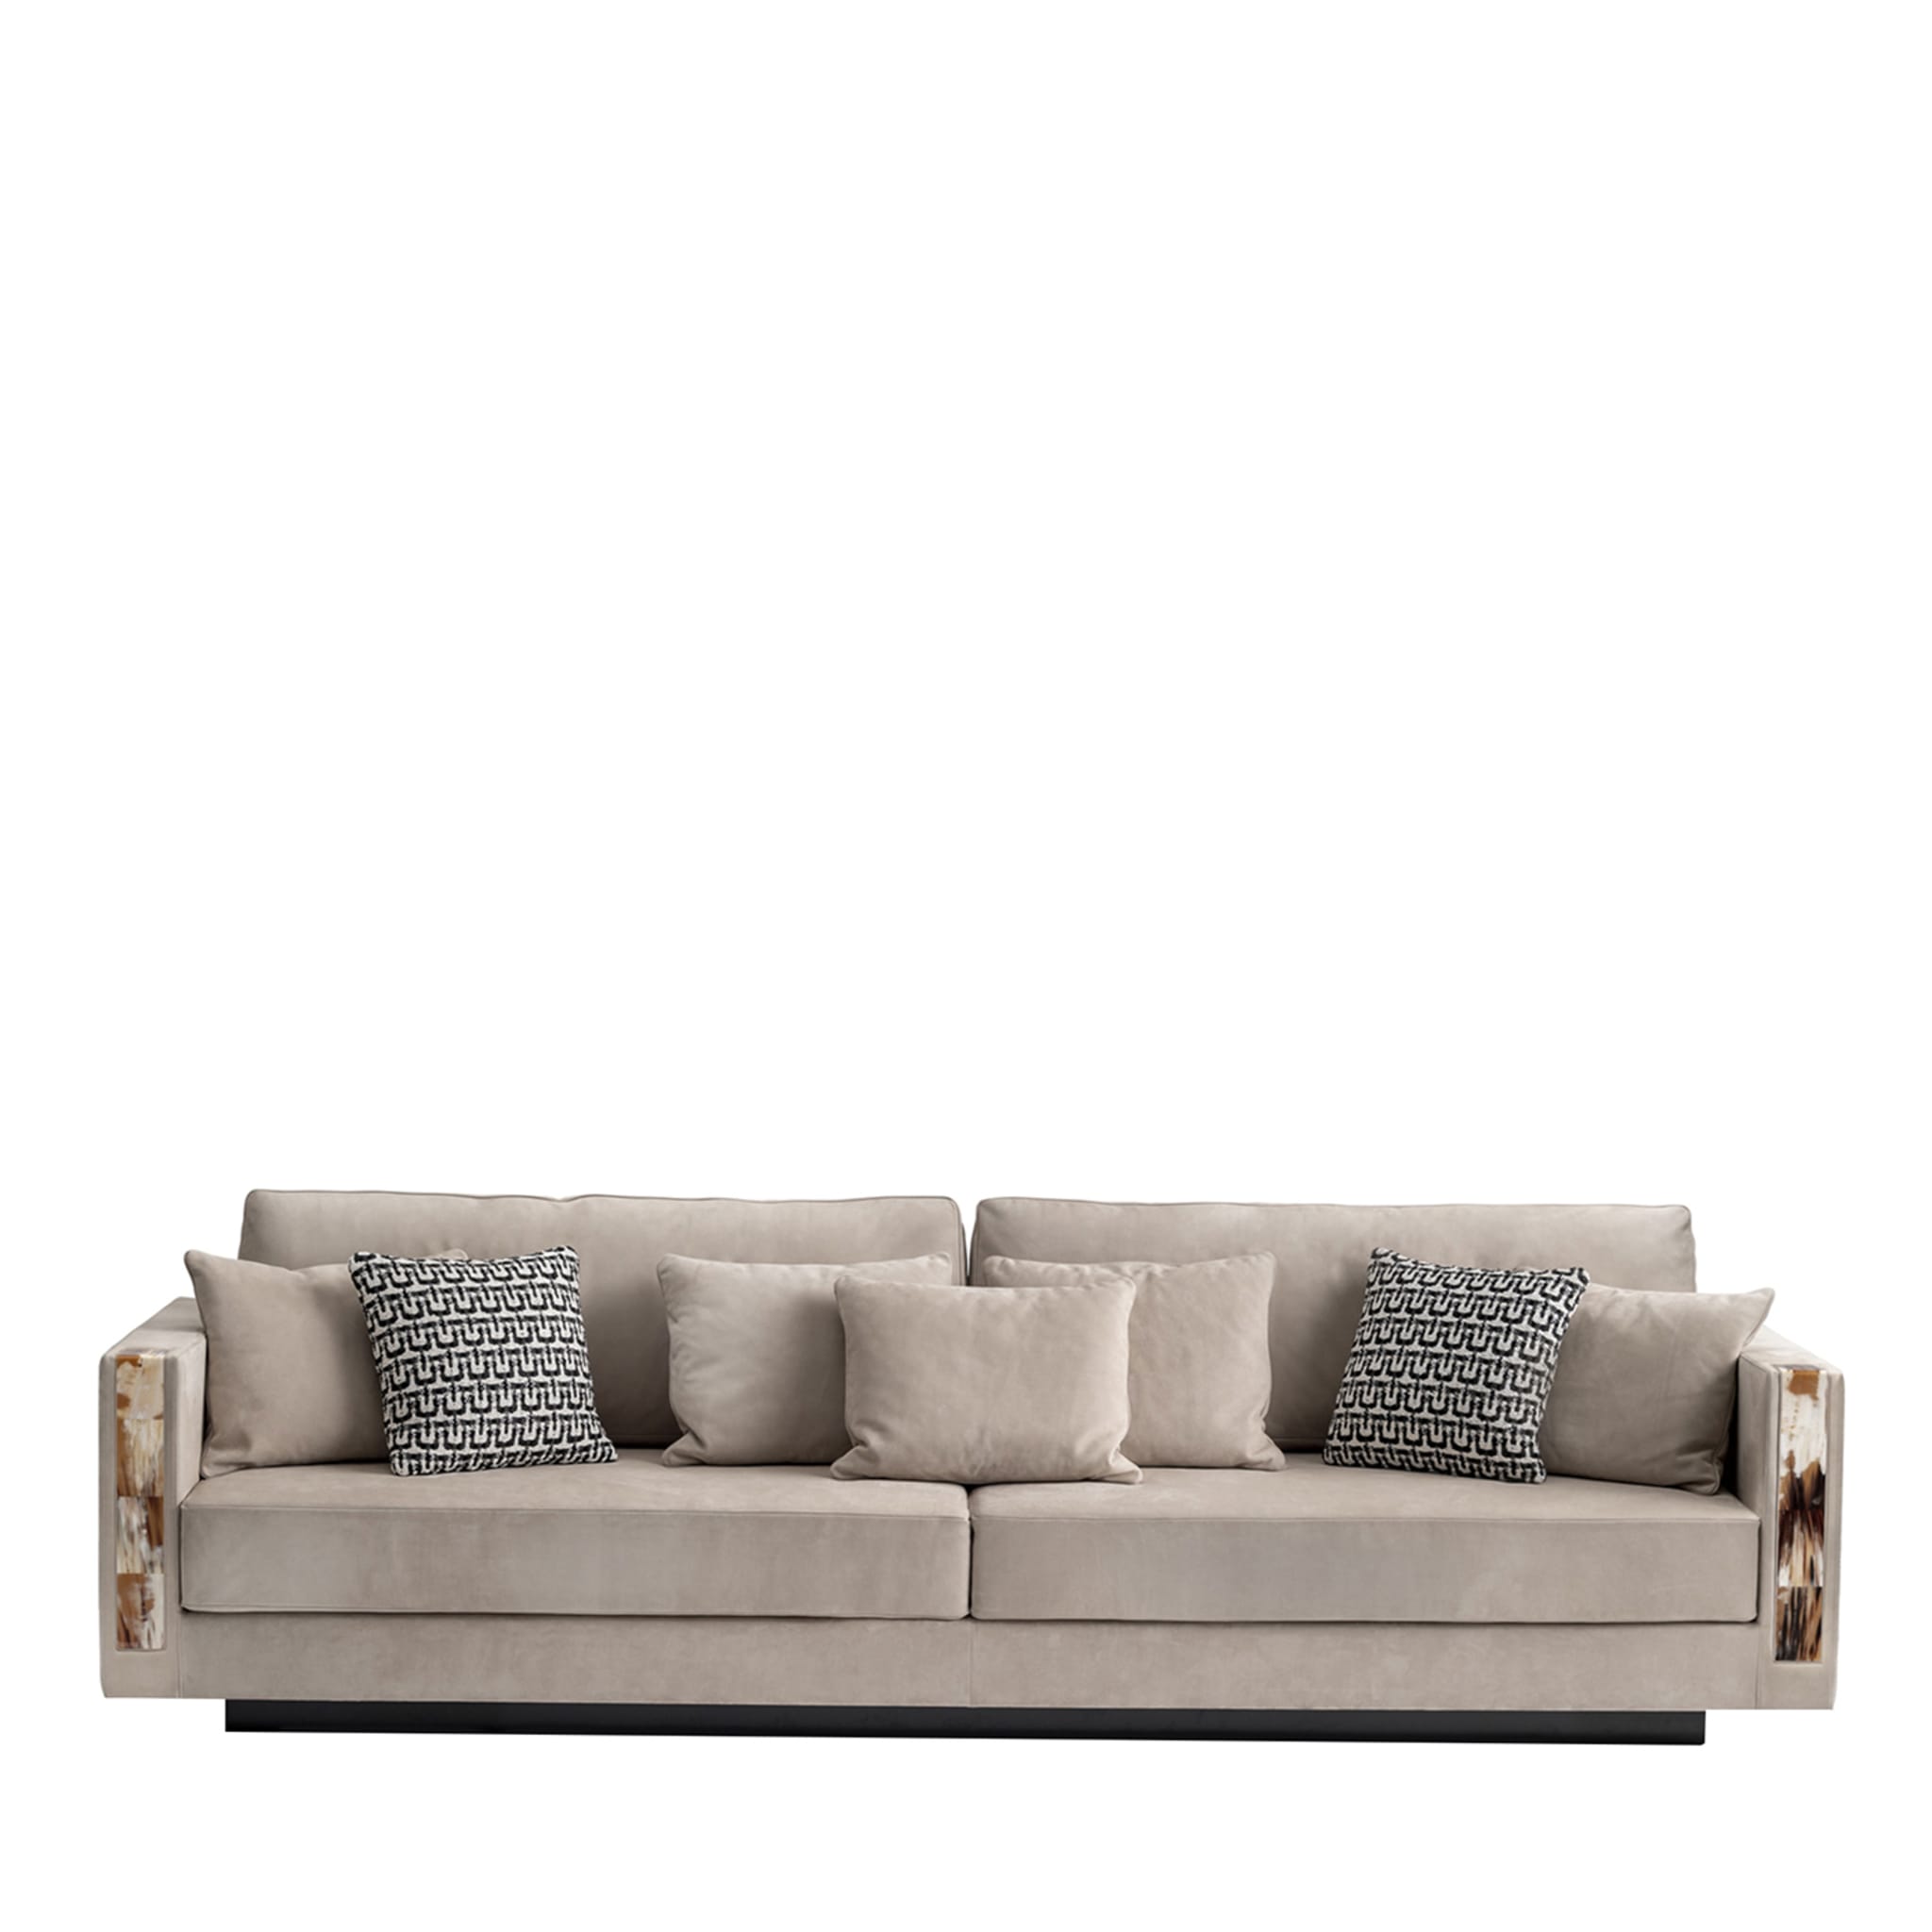 Zeus 4-Seater Beige Sofa with Horn Inlays - Main view